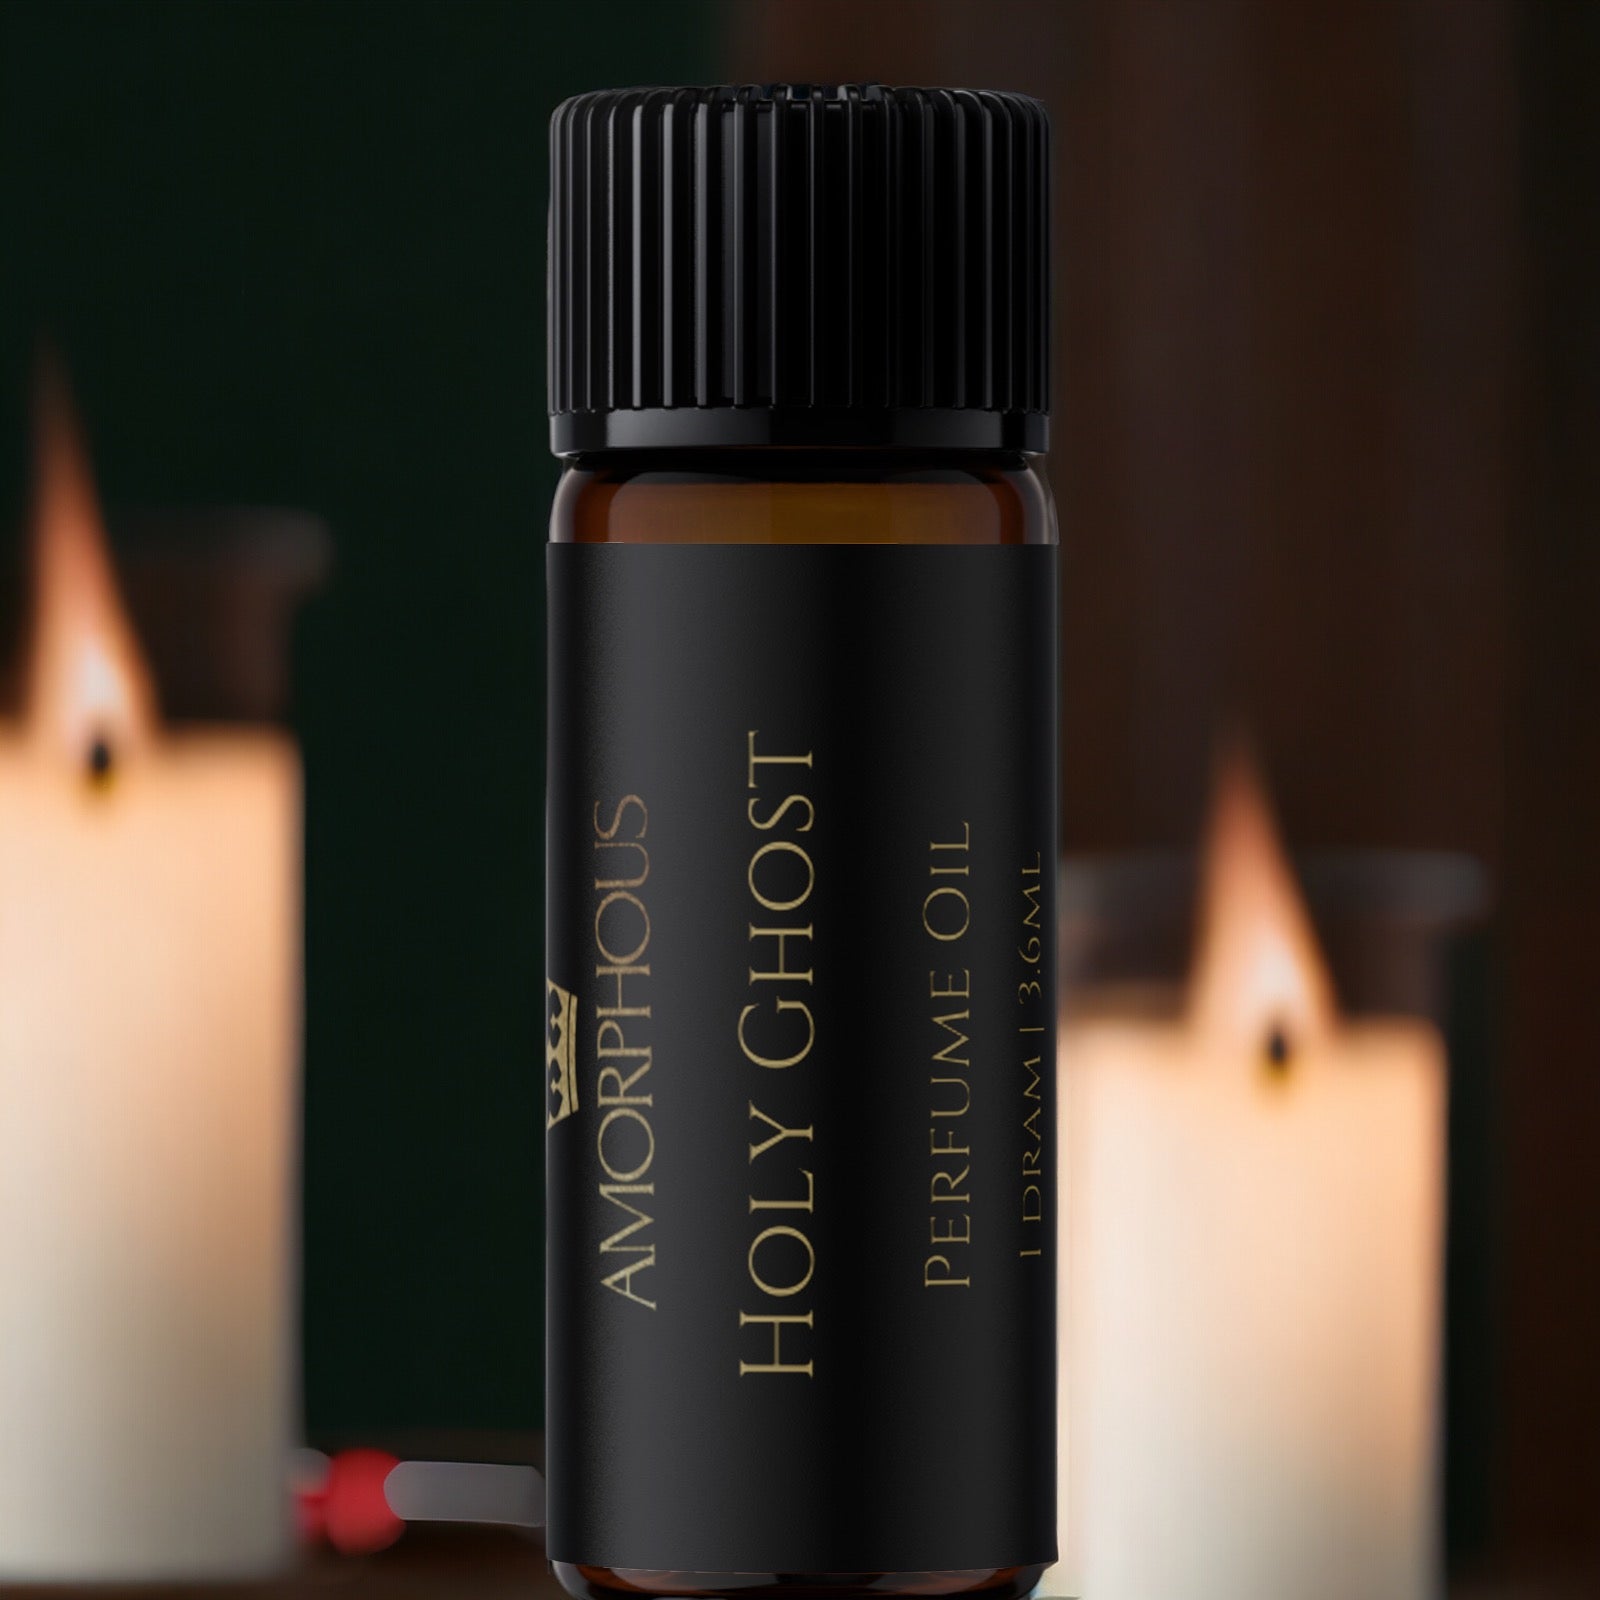 Holy Ghost Perfume Oil